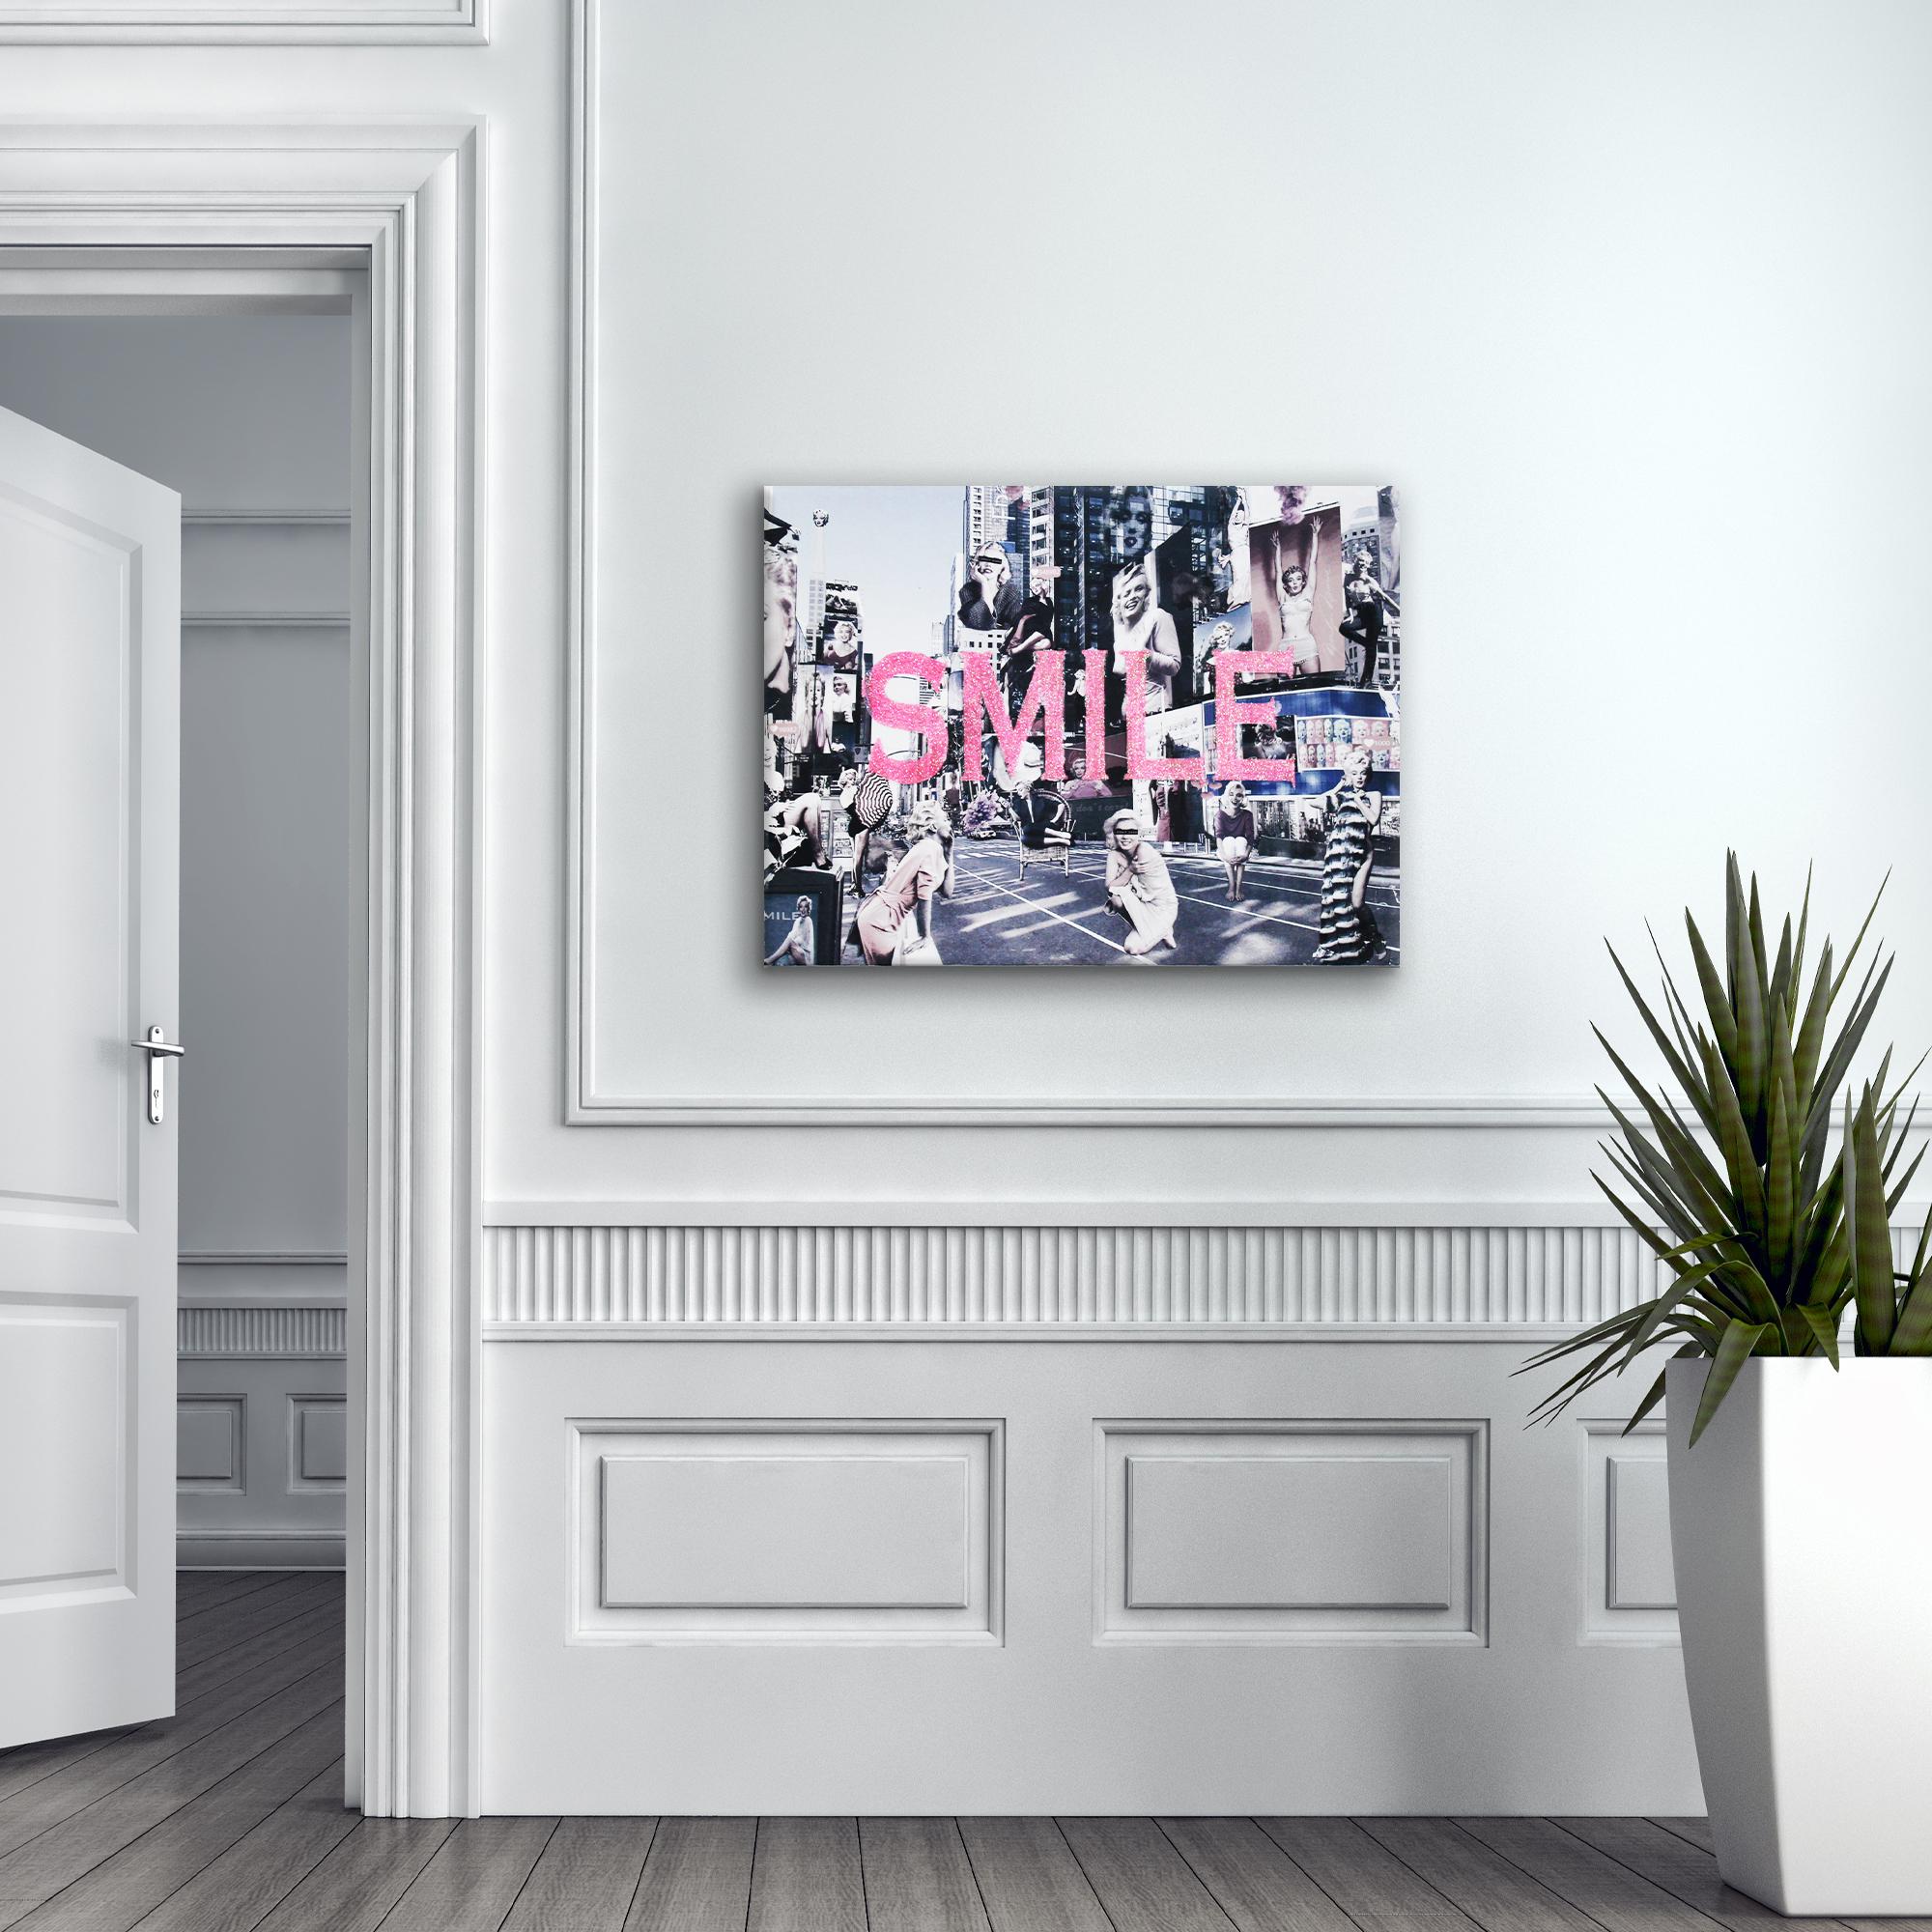 'Smile' Mixed Media Wrapped Canvas features a black and white cityscape with images of Marilyn Monroe and the text 